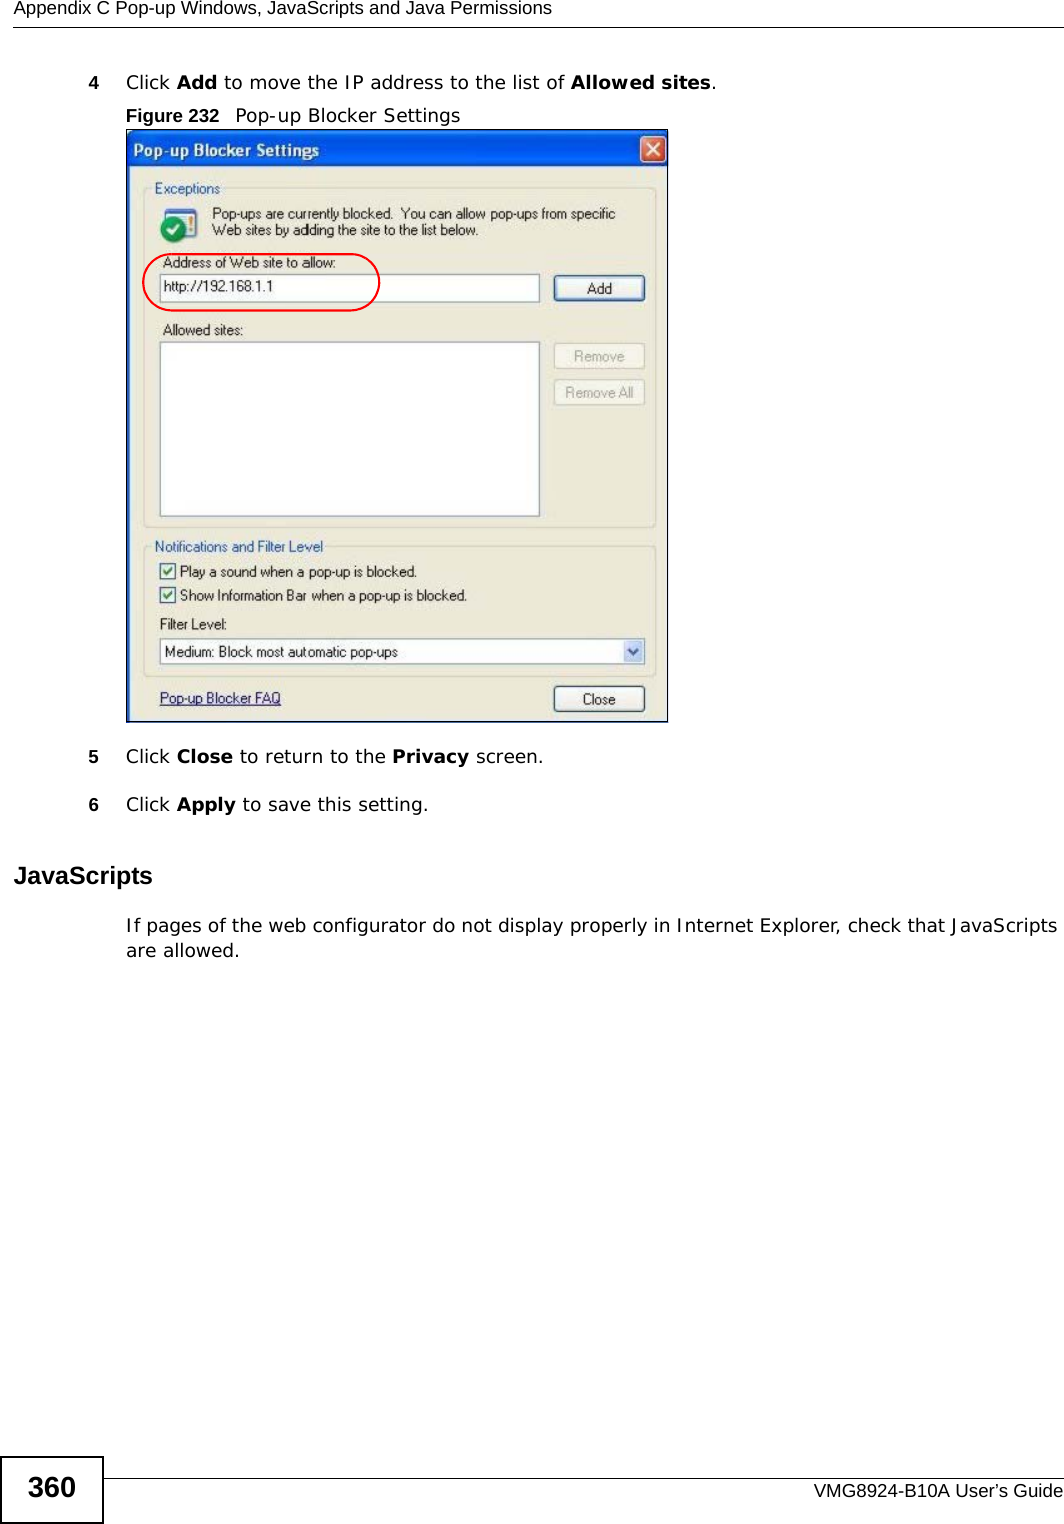 Appendix C Pop-up Windows, JavaScripts and Java PermissionsVMG8924-B10A User’s Guide3604Click Add to move the IP address to the list of Allowed sites.Figure 232   Pop-up Blocker Settings5Click Close to return to the Privacy screen. 6Click Apply to save this setting. JavaScriptsIf pages of the web configurator do not display properly in Internet Explorer, check that JavaScripts are allowed. 